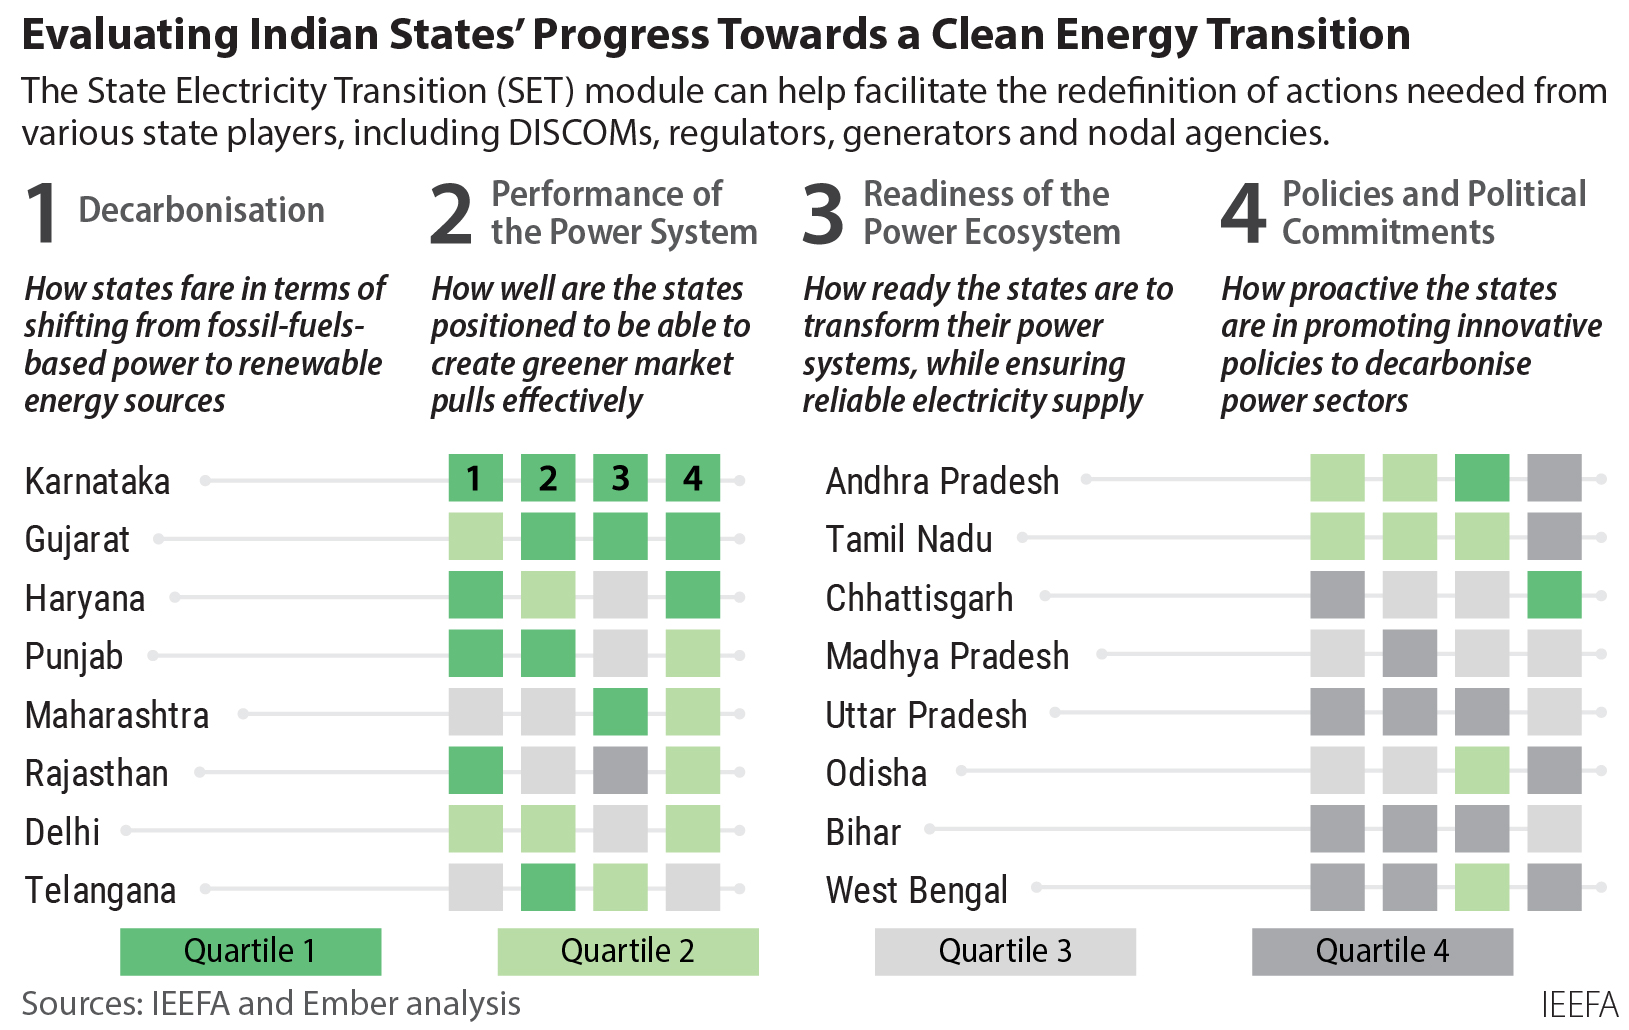 Evaluating Indian States' Progress Towards Clean Energy Transition